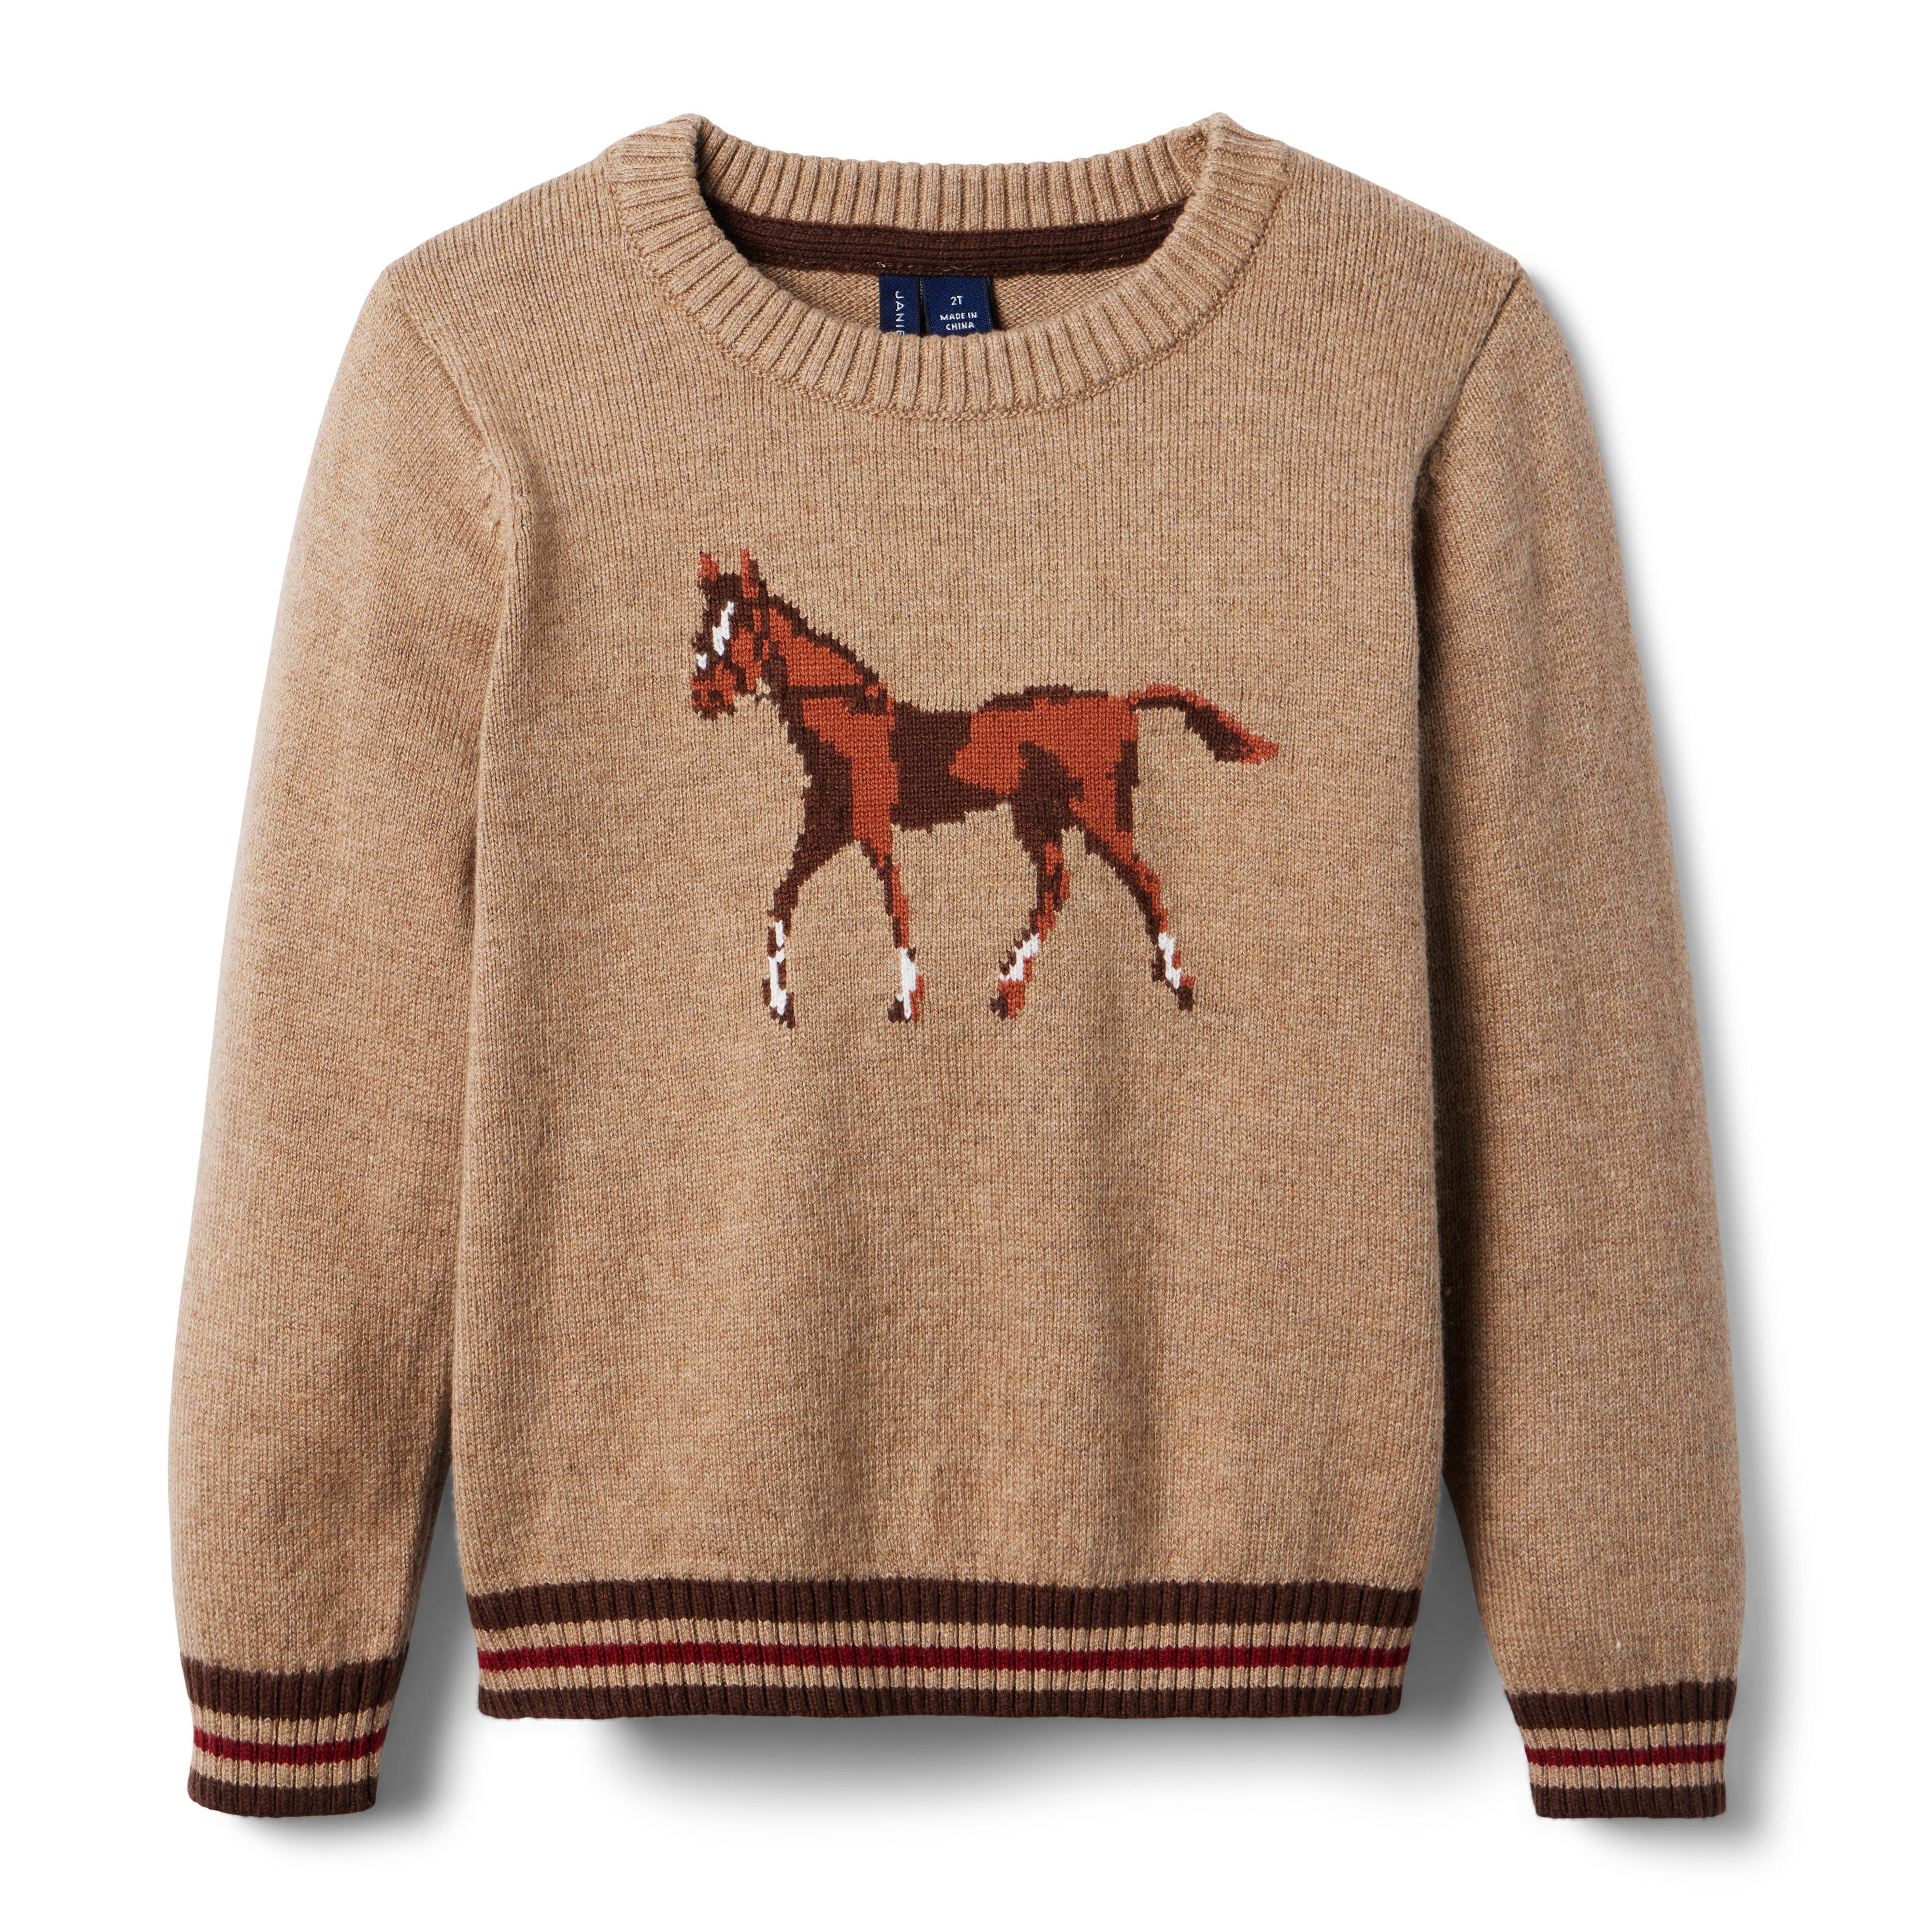 The Horse Show Sweater